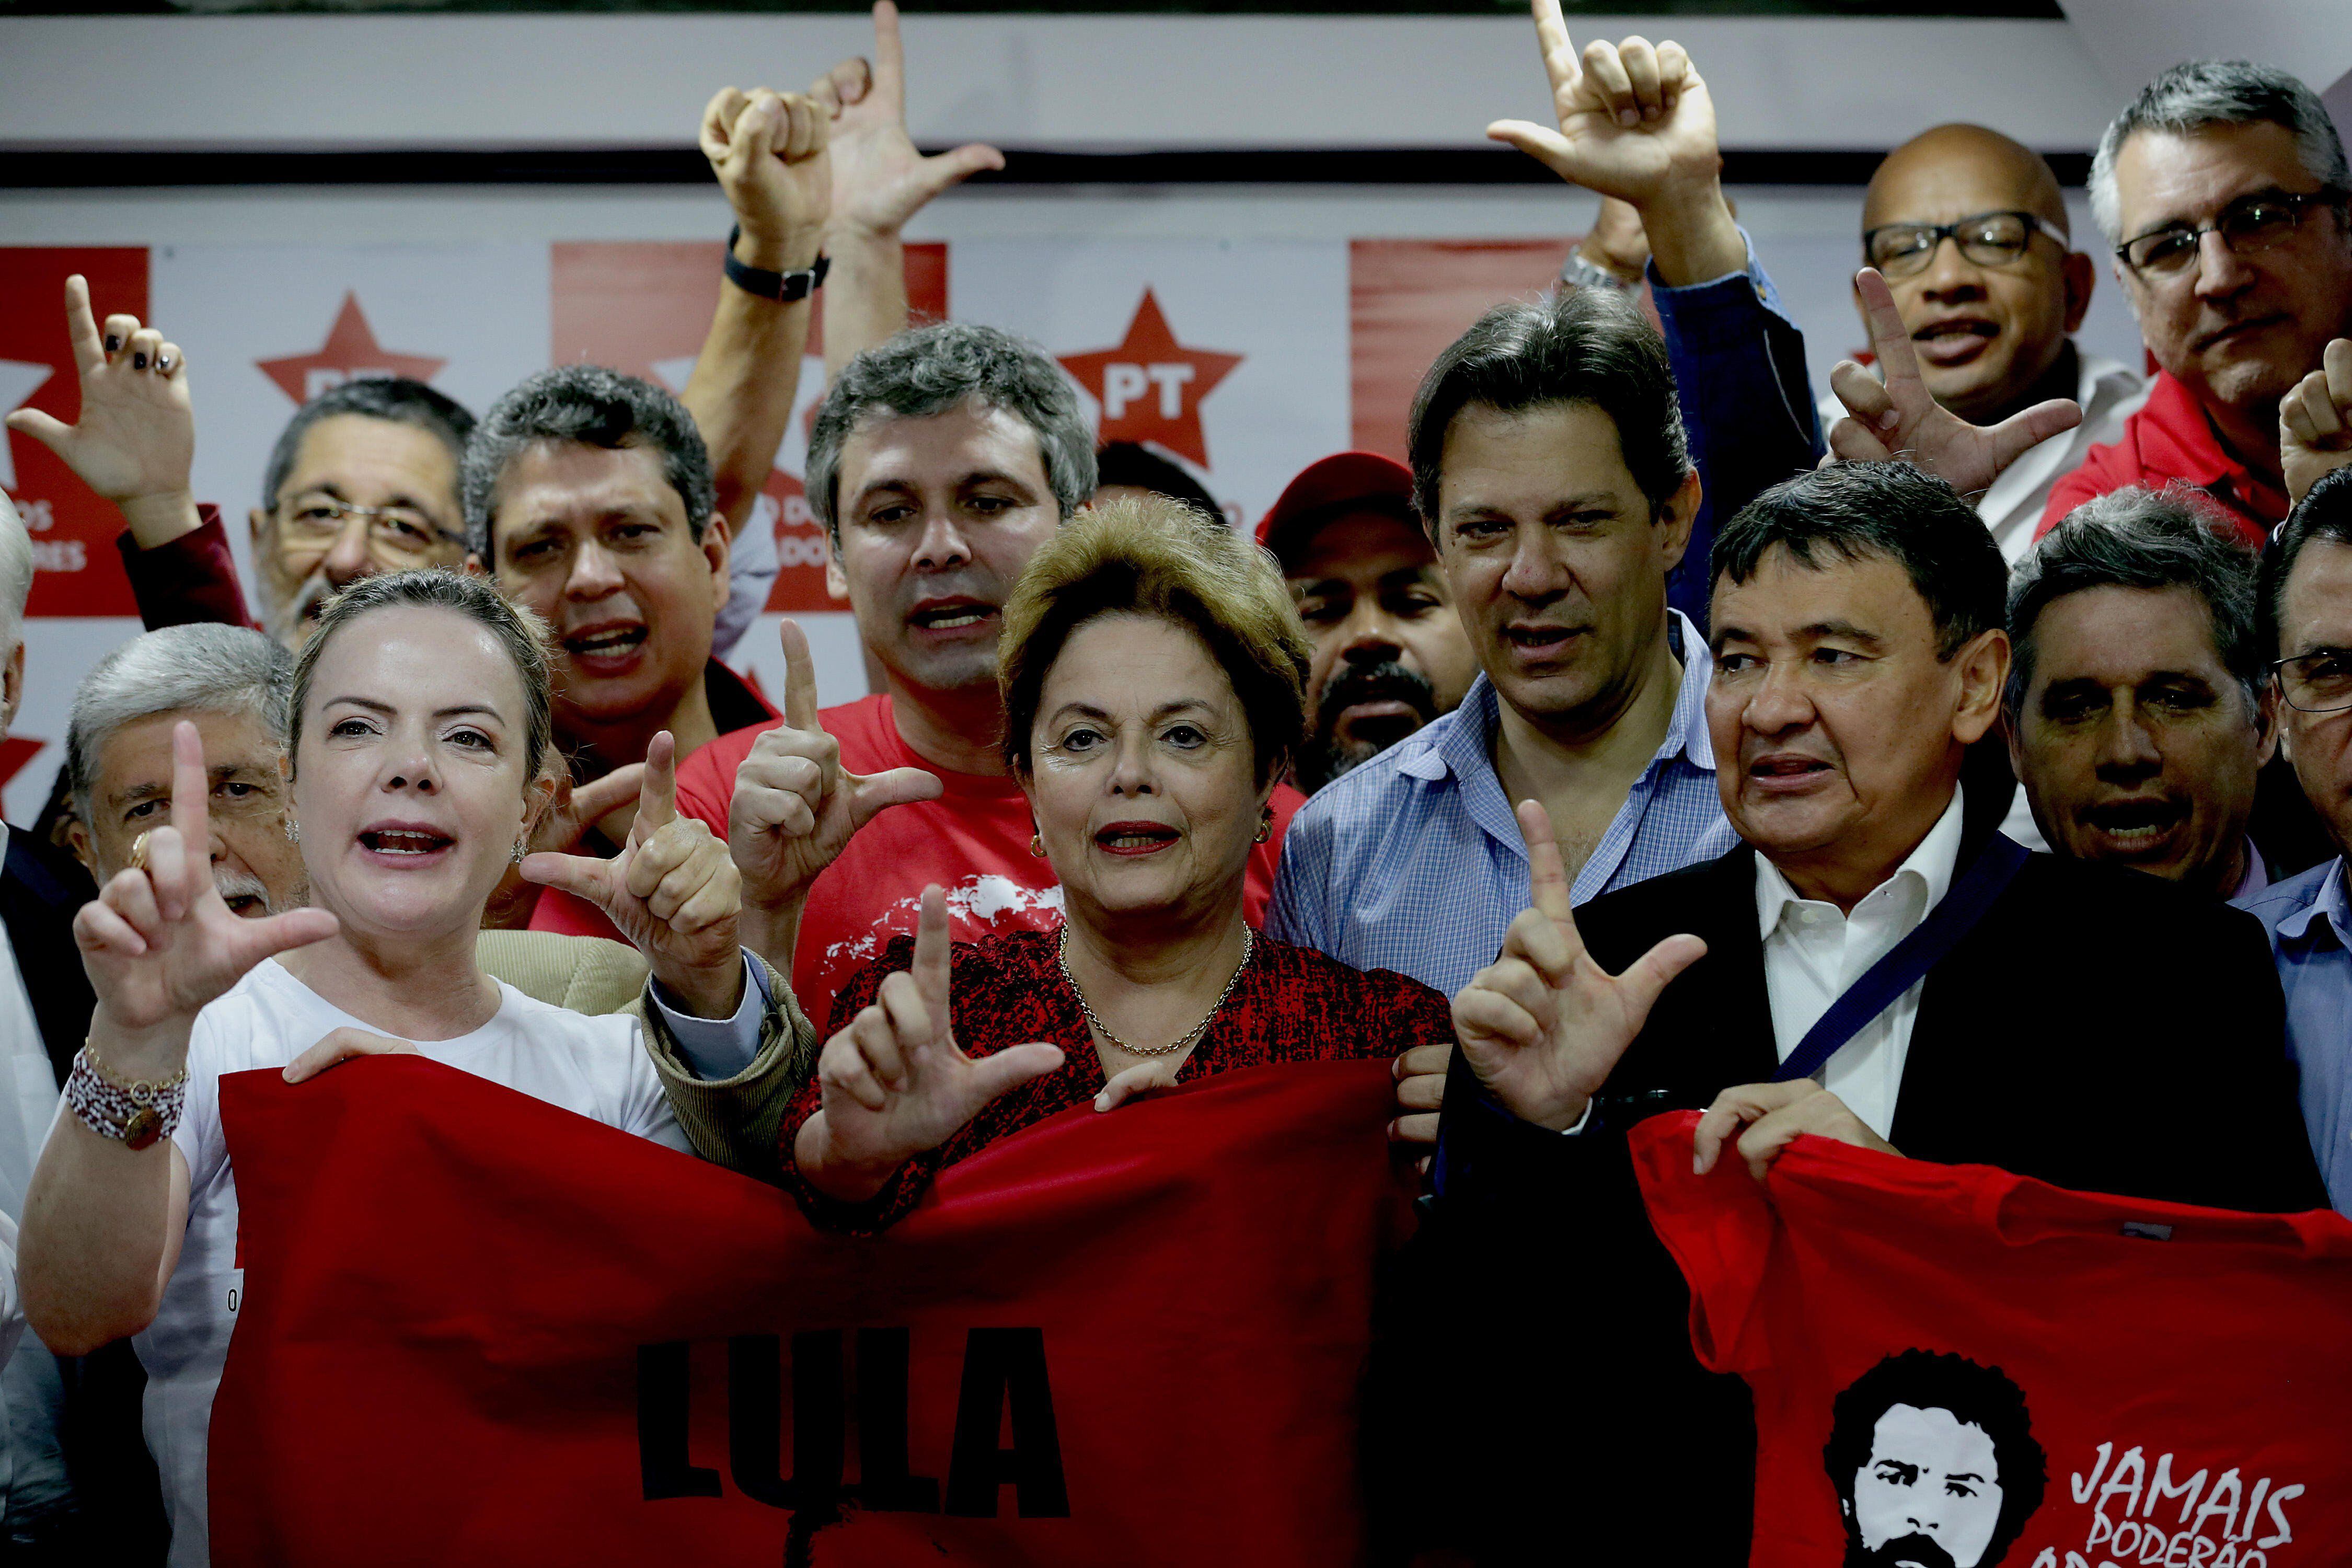 Former Brazilian President Dilma Rousseff (c) poses with supporters during a meeting at the national headquarters of the Workers' Party (PT) in Sao Paulo, Brazil, Monday, July 9, 2018. EFE